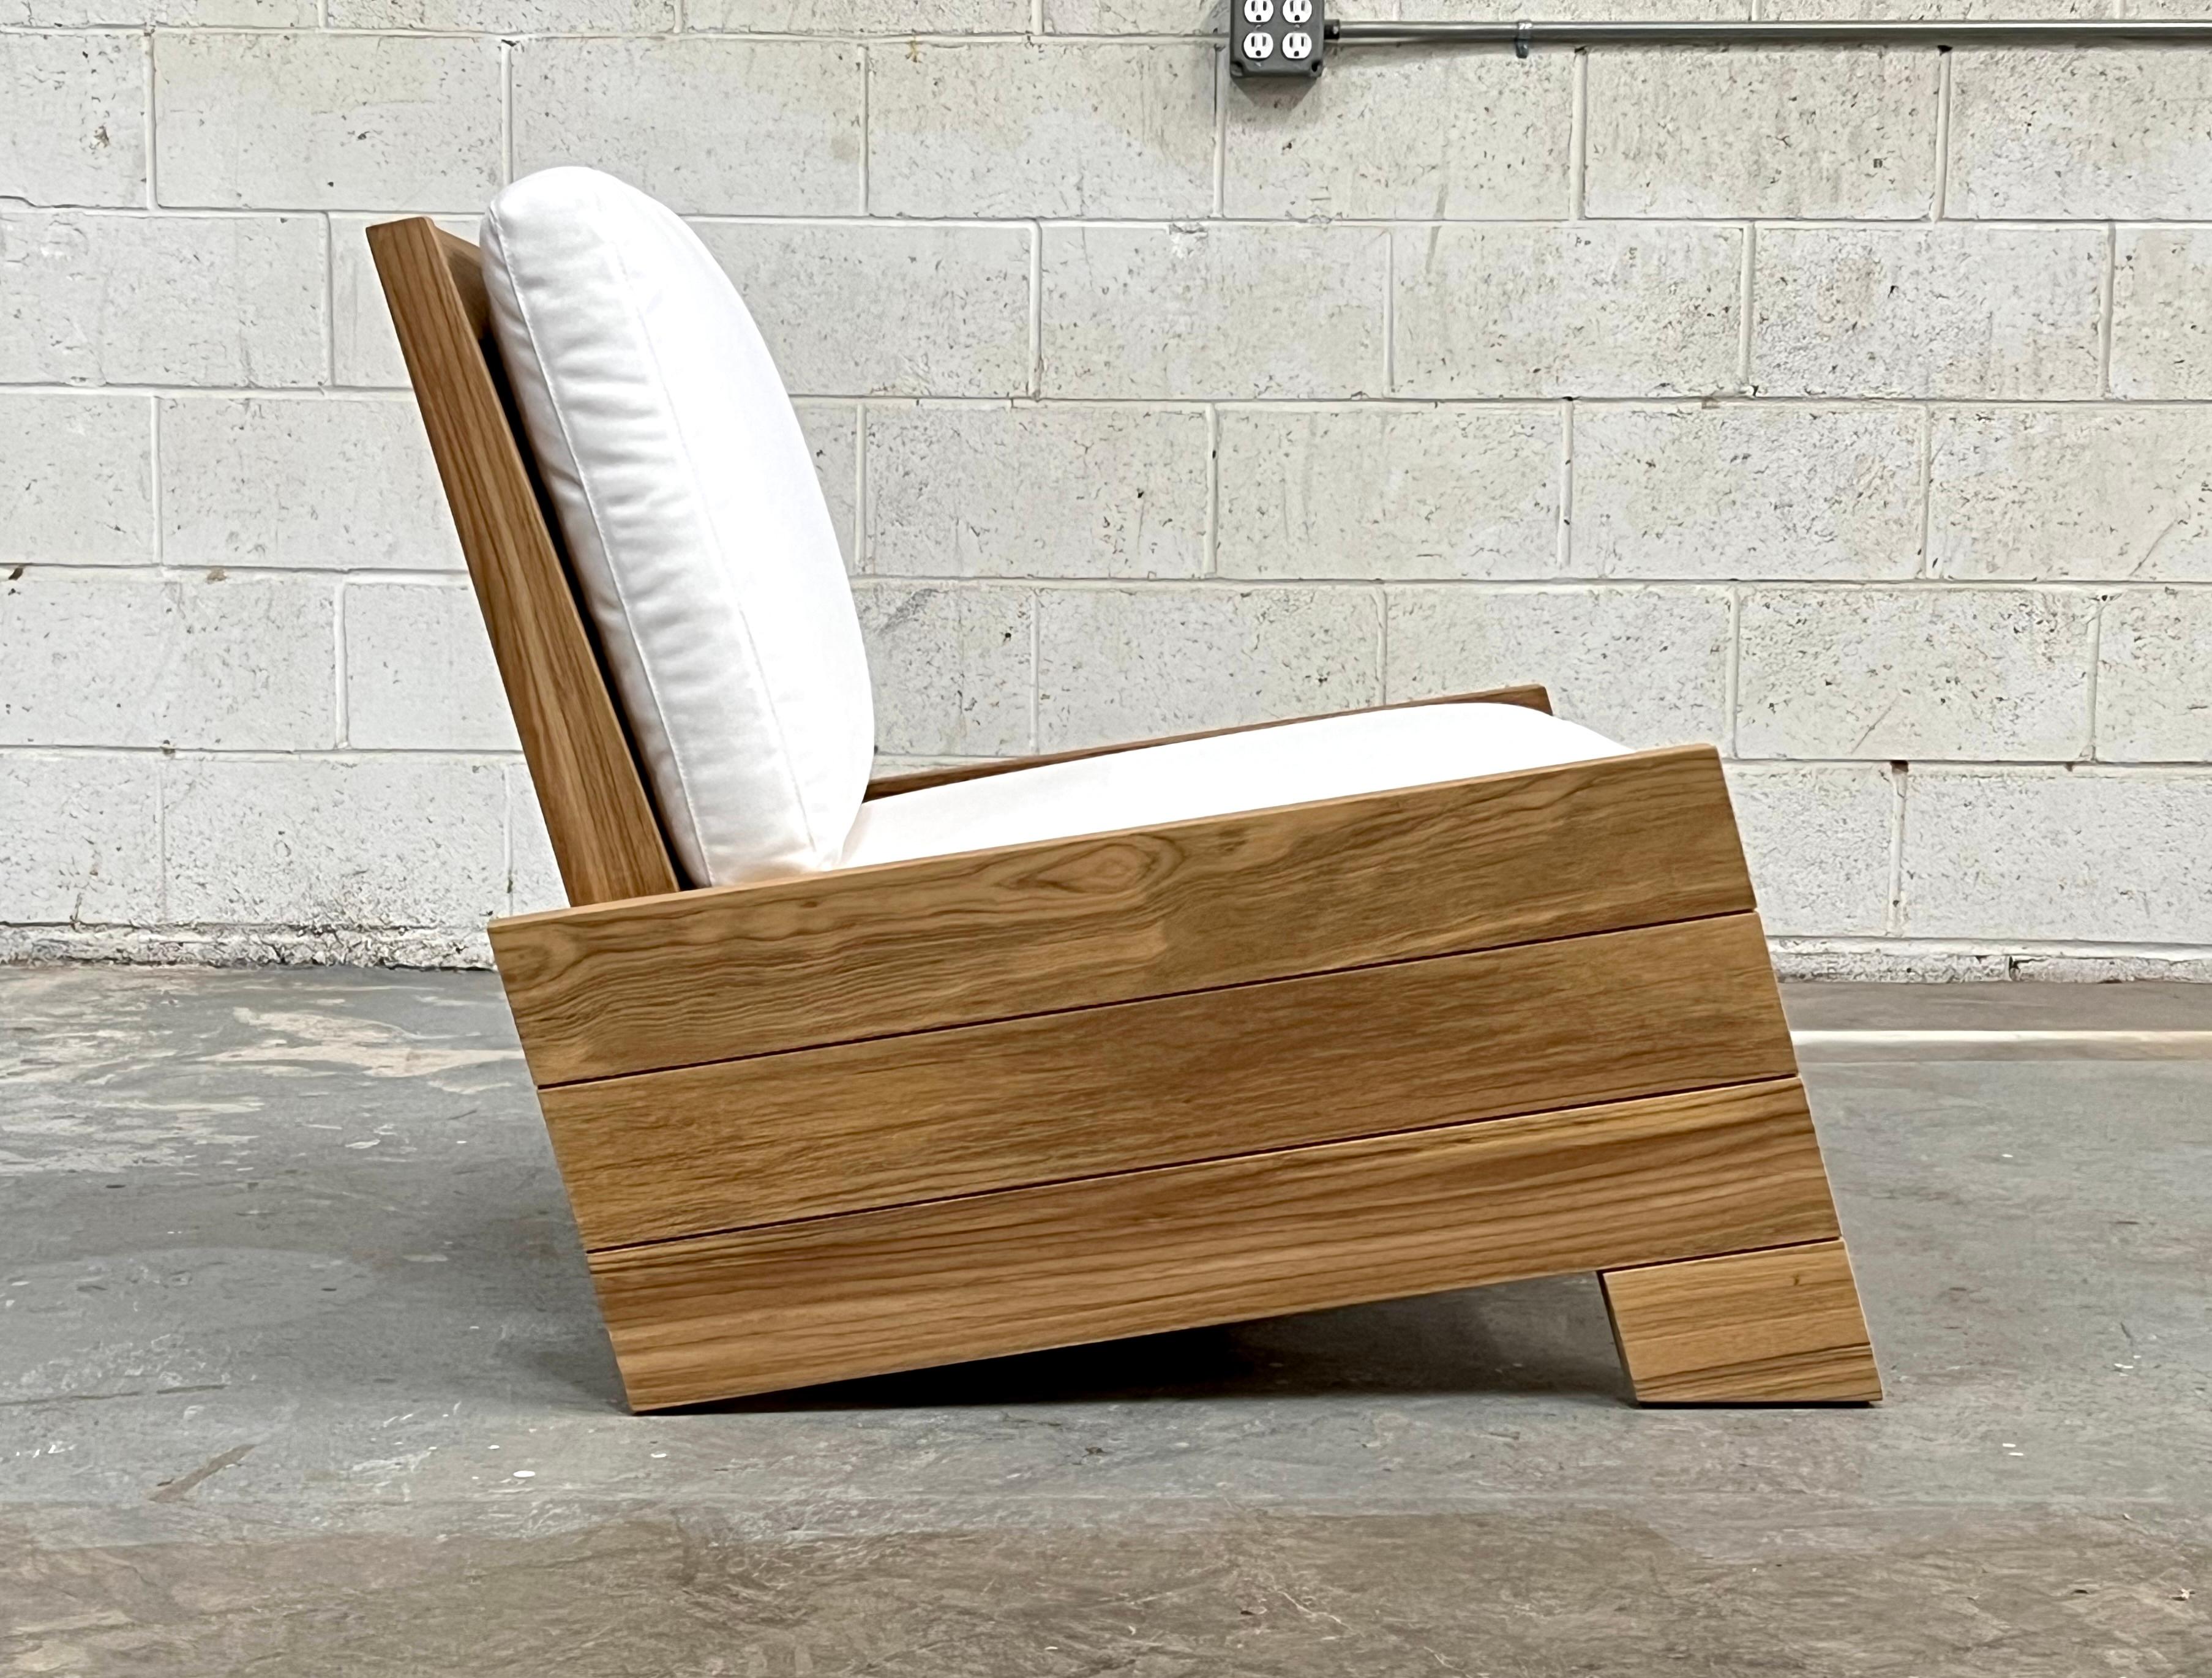 Custom lounge chair made from teak, suitable for outdoor use. Because these chairs are custom made in our own Los Angeles workshop, all aspects of design can be influenced, including wood species, size, finish and material. 

